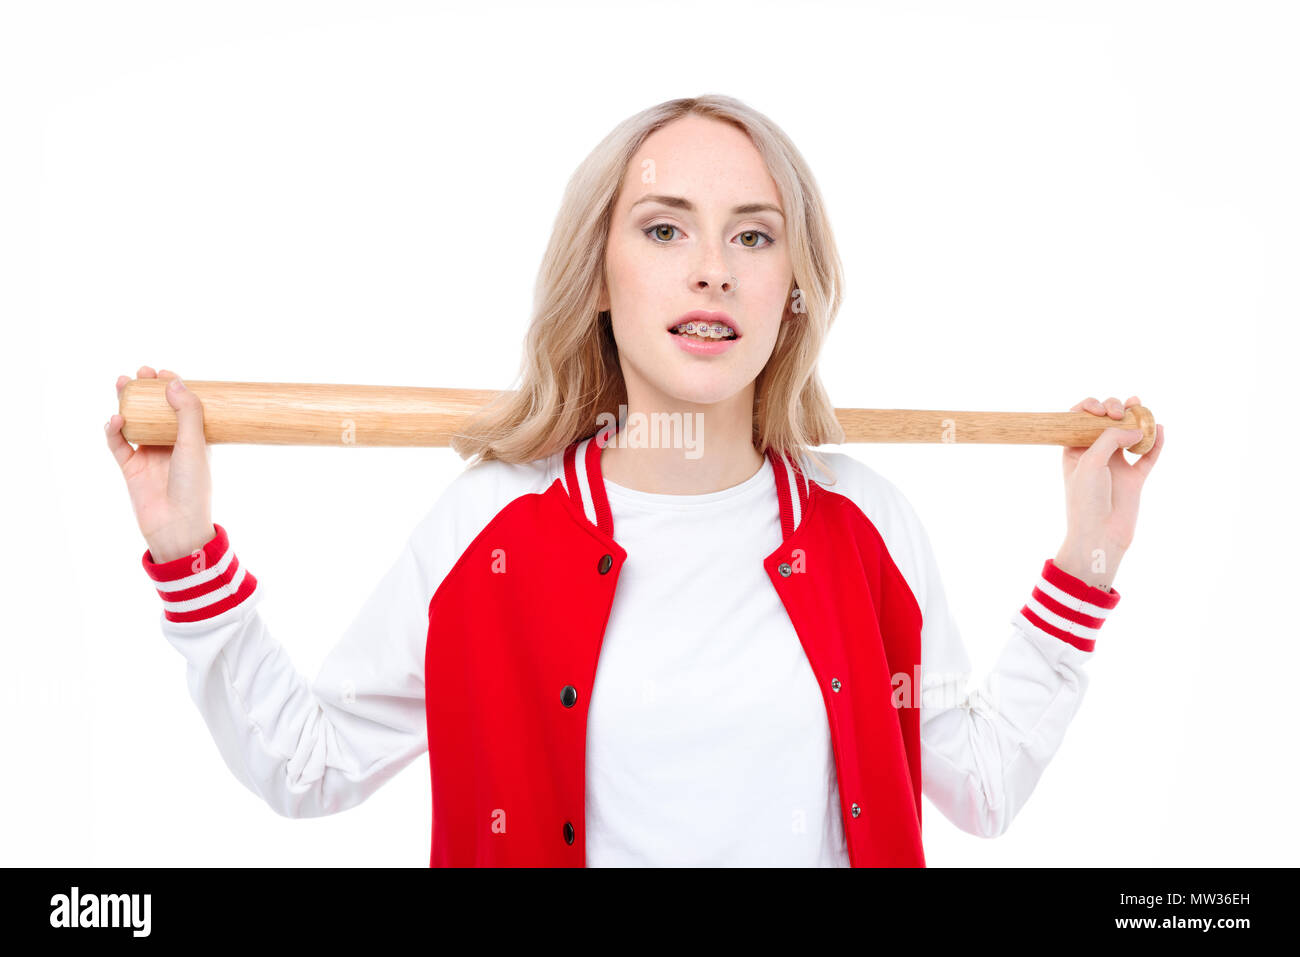 Three quarter length shot of a young woman holding a baseball bat behind her shoulders. Stock Photo